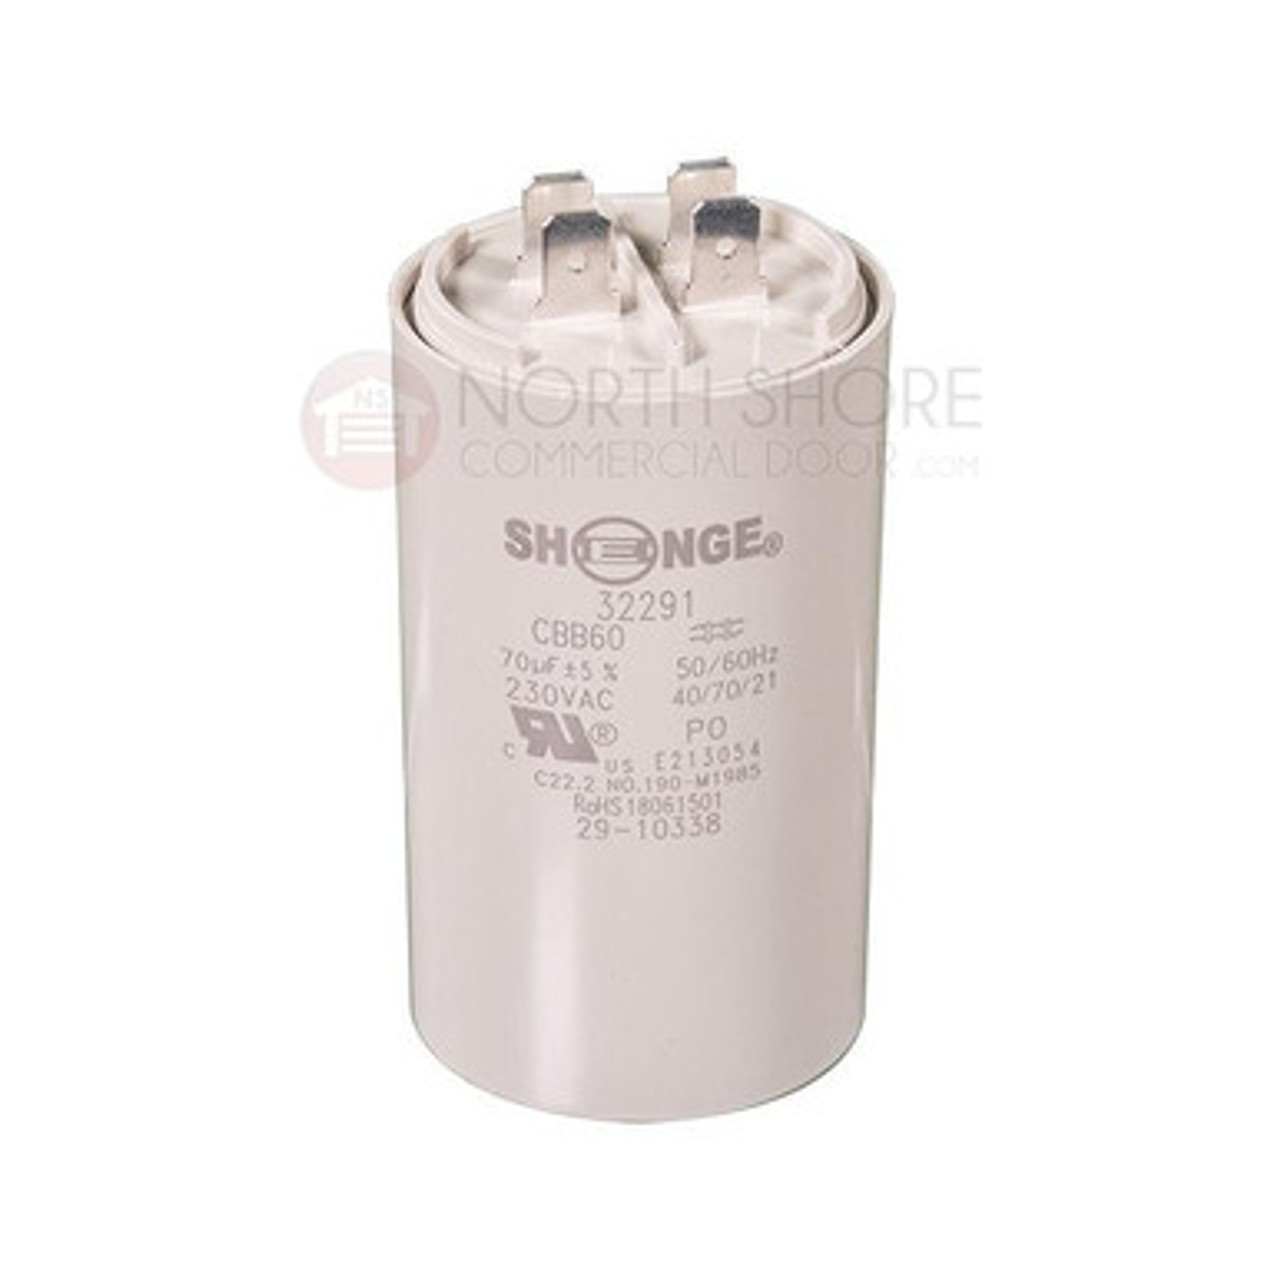 LiftMaster 29-10338 Capacitor 1/2 HP 70 MFD with bracket